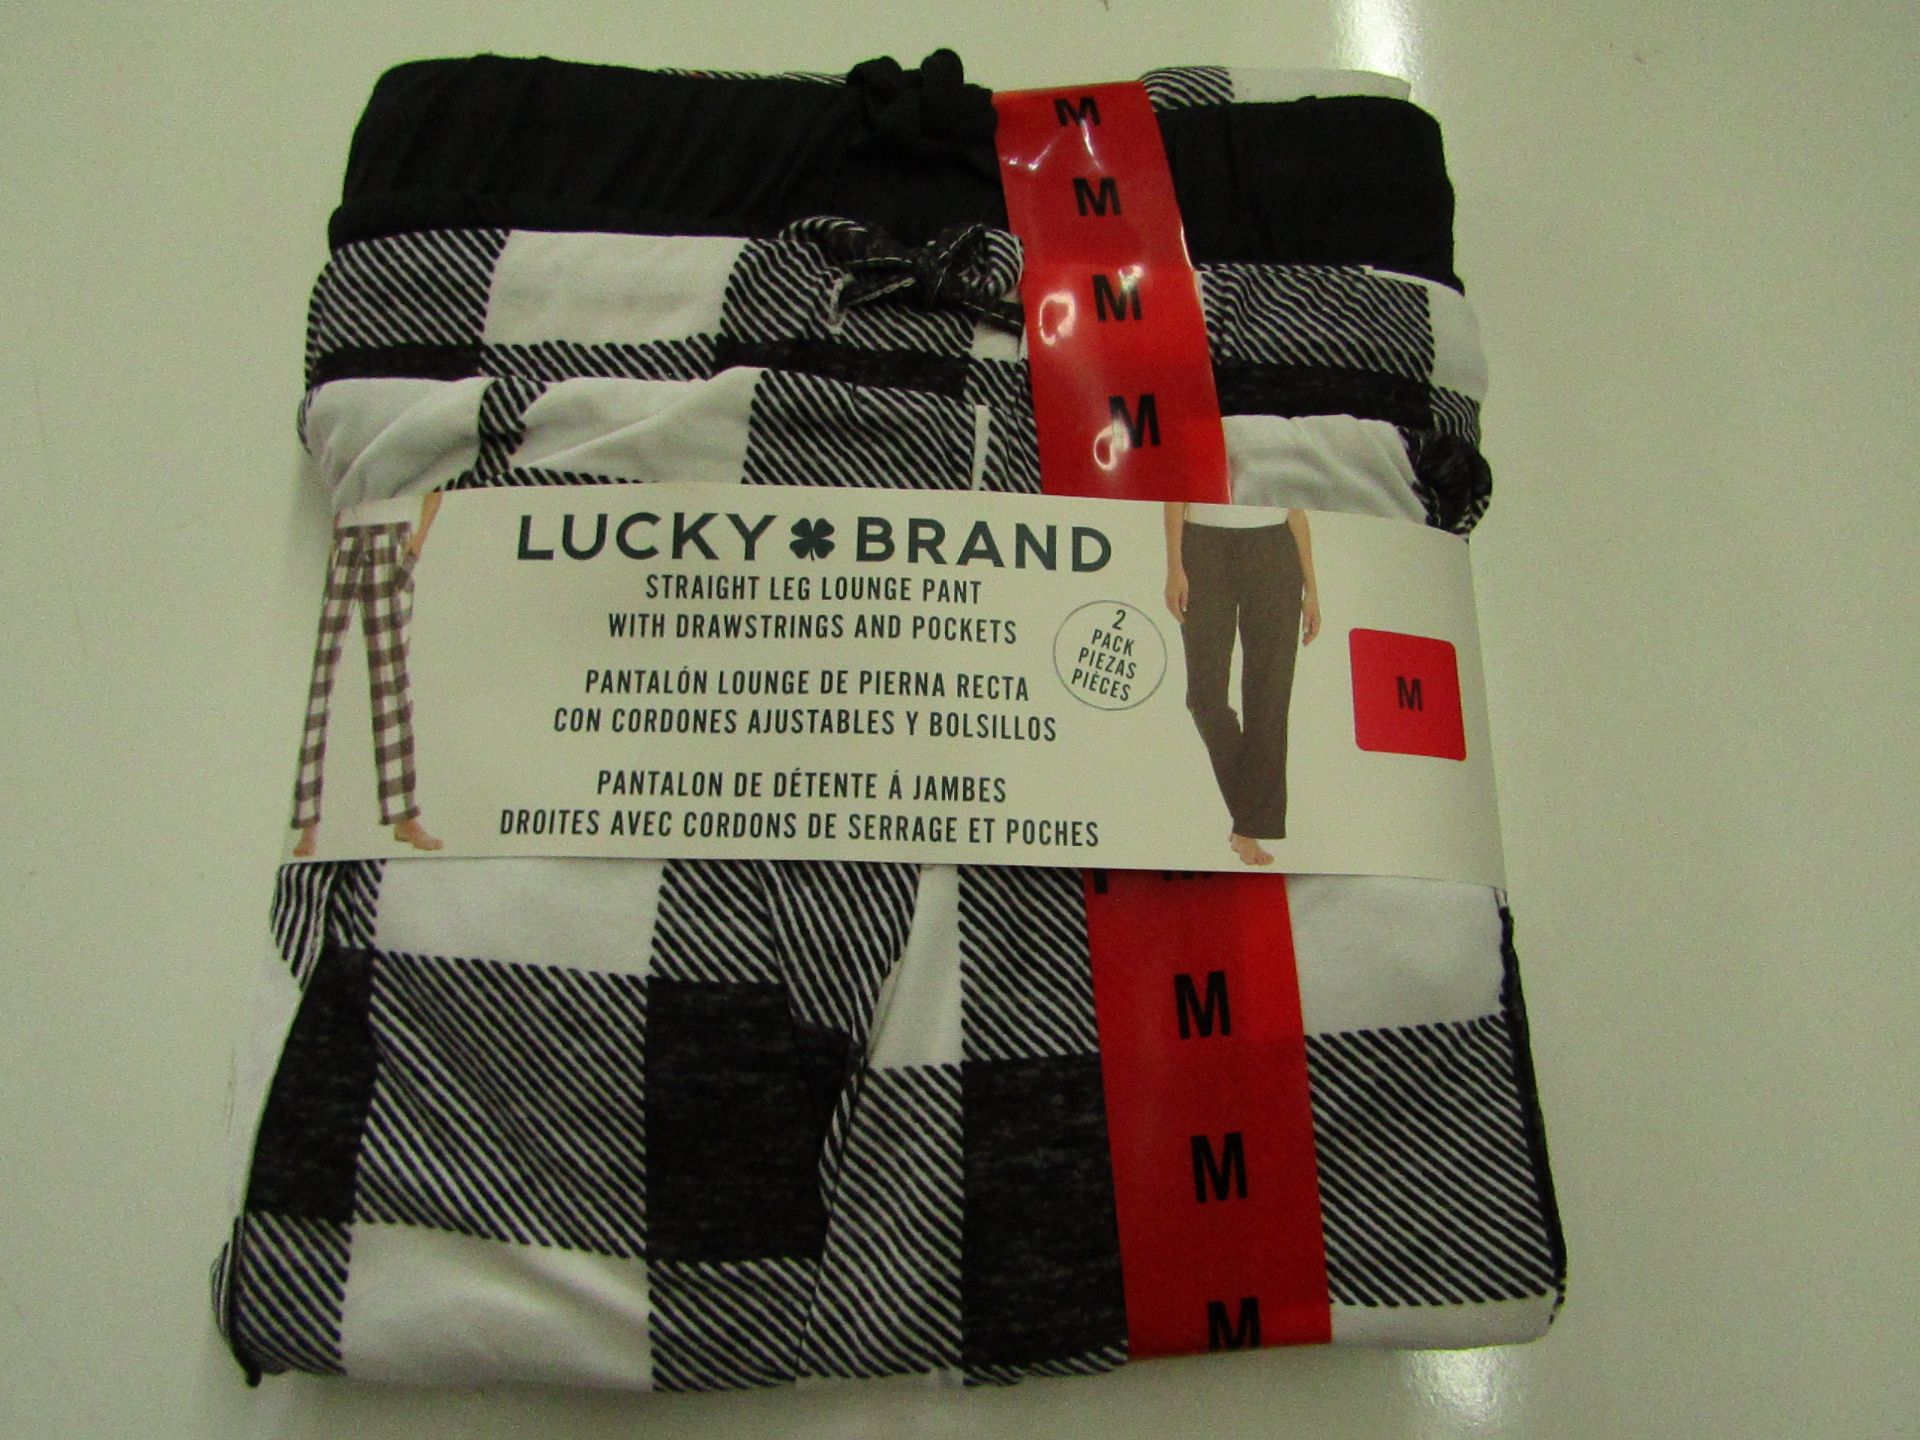 Lucky Brand - Straight Leg Lounge Set With Pockets - Size Medium - New & Packaged